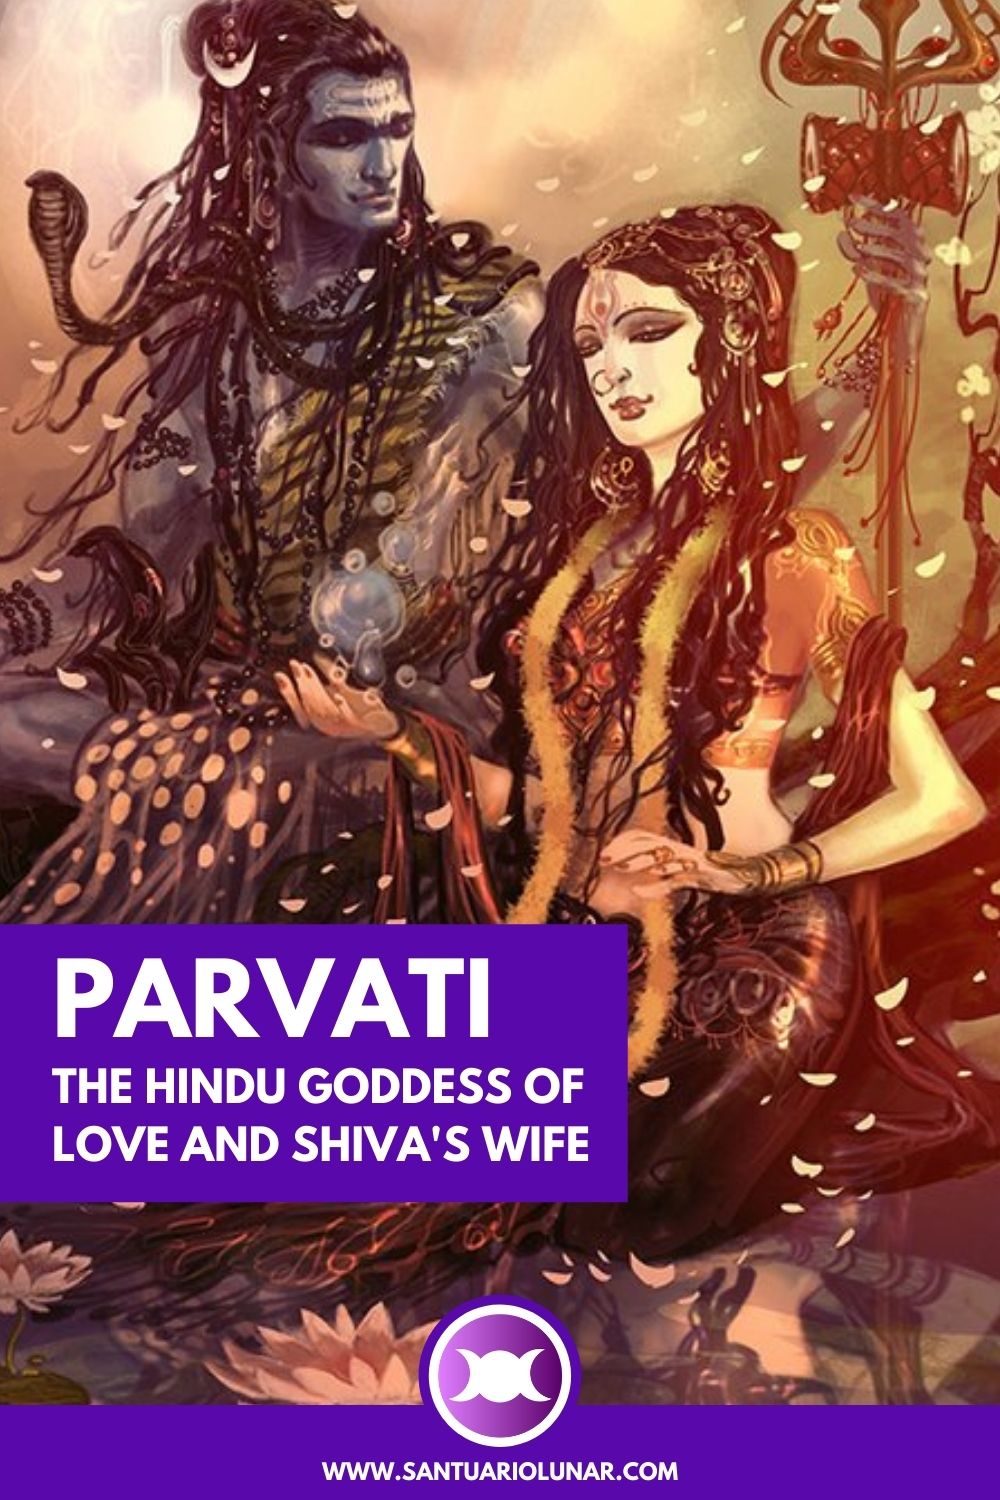 A Pin for Pinterest with Abhishke's painting of Parvati and Shiva